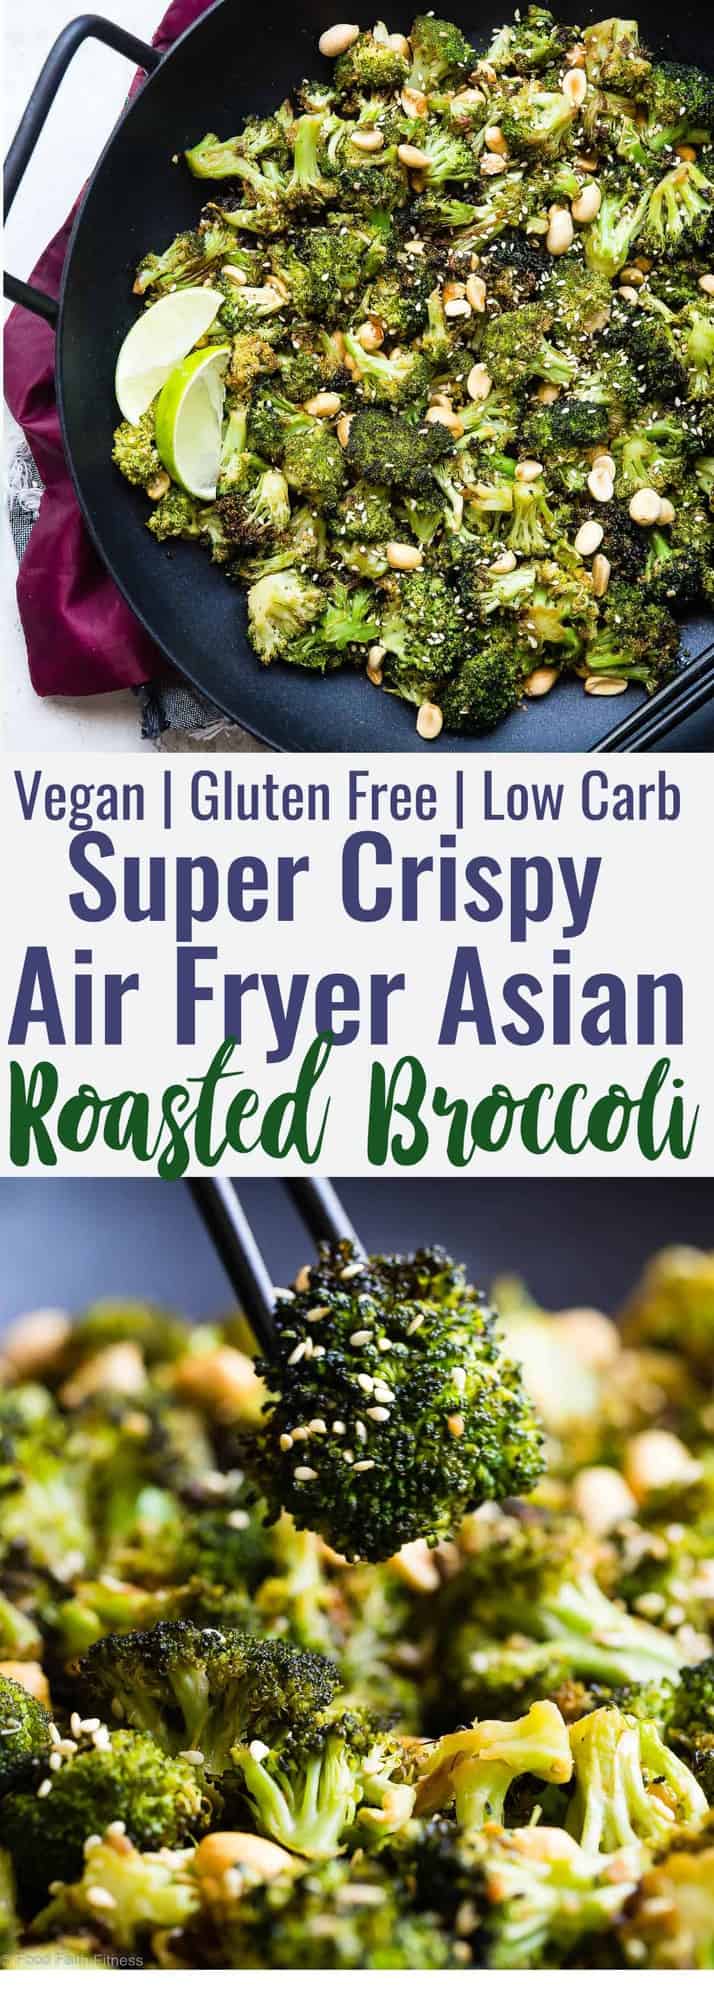 Air Fryer Fried Asian Broccoli - This healthy, gluten-free, low-carb Asian broccoli has a flavorful Asian dressing that will add a kick to your next meal! Sure your family will LOVE vegetables and an oven roasted option is included! | #Foodfaithfitness | #Vegan #Healthy #AirFyer #Gluten-Free #Lowcarb